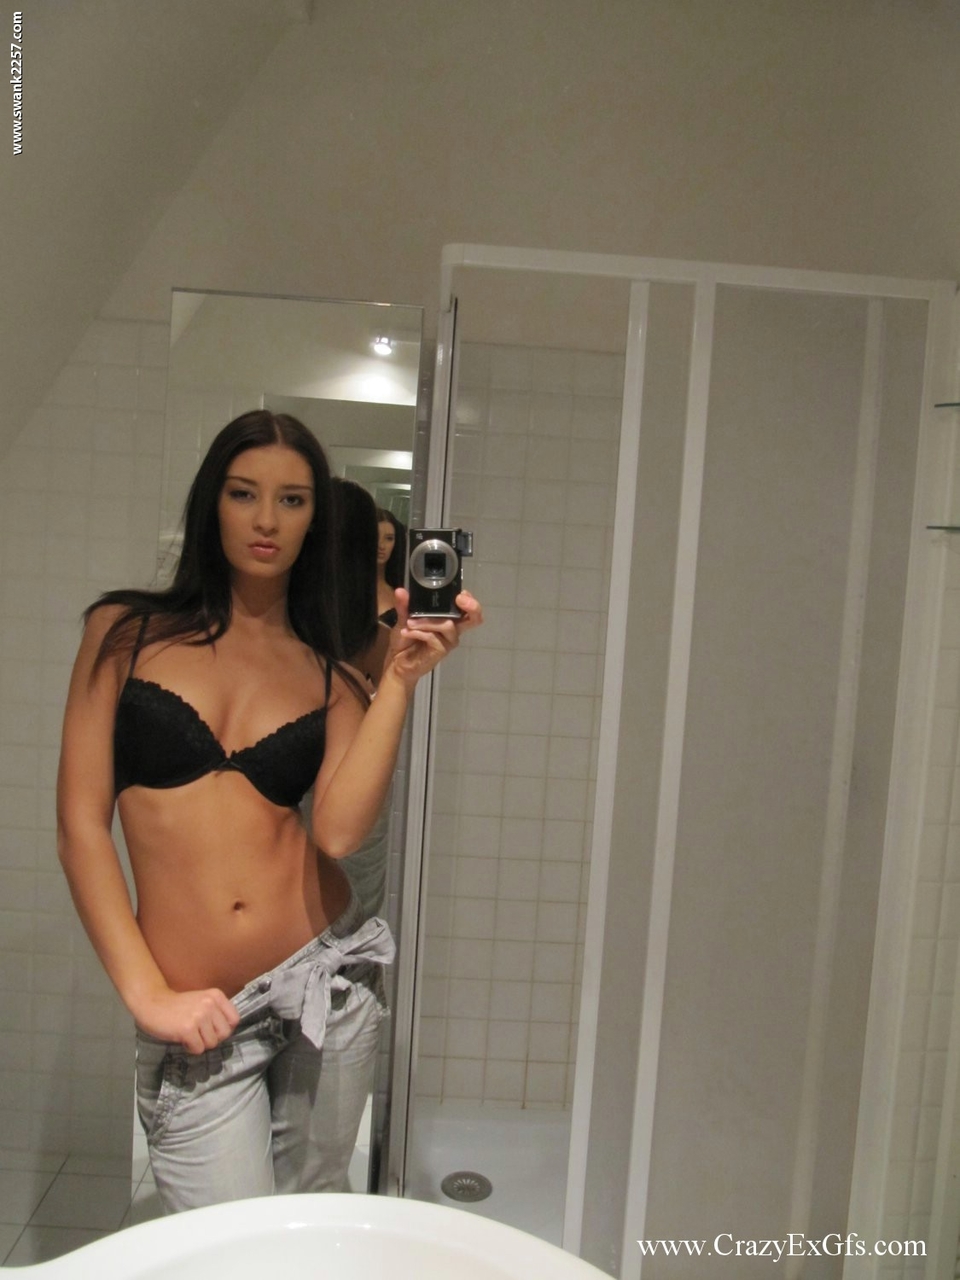 Amateur chick takes mirror selfies while stripping naked in bathroom pic